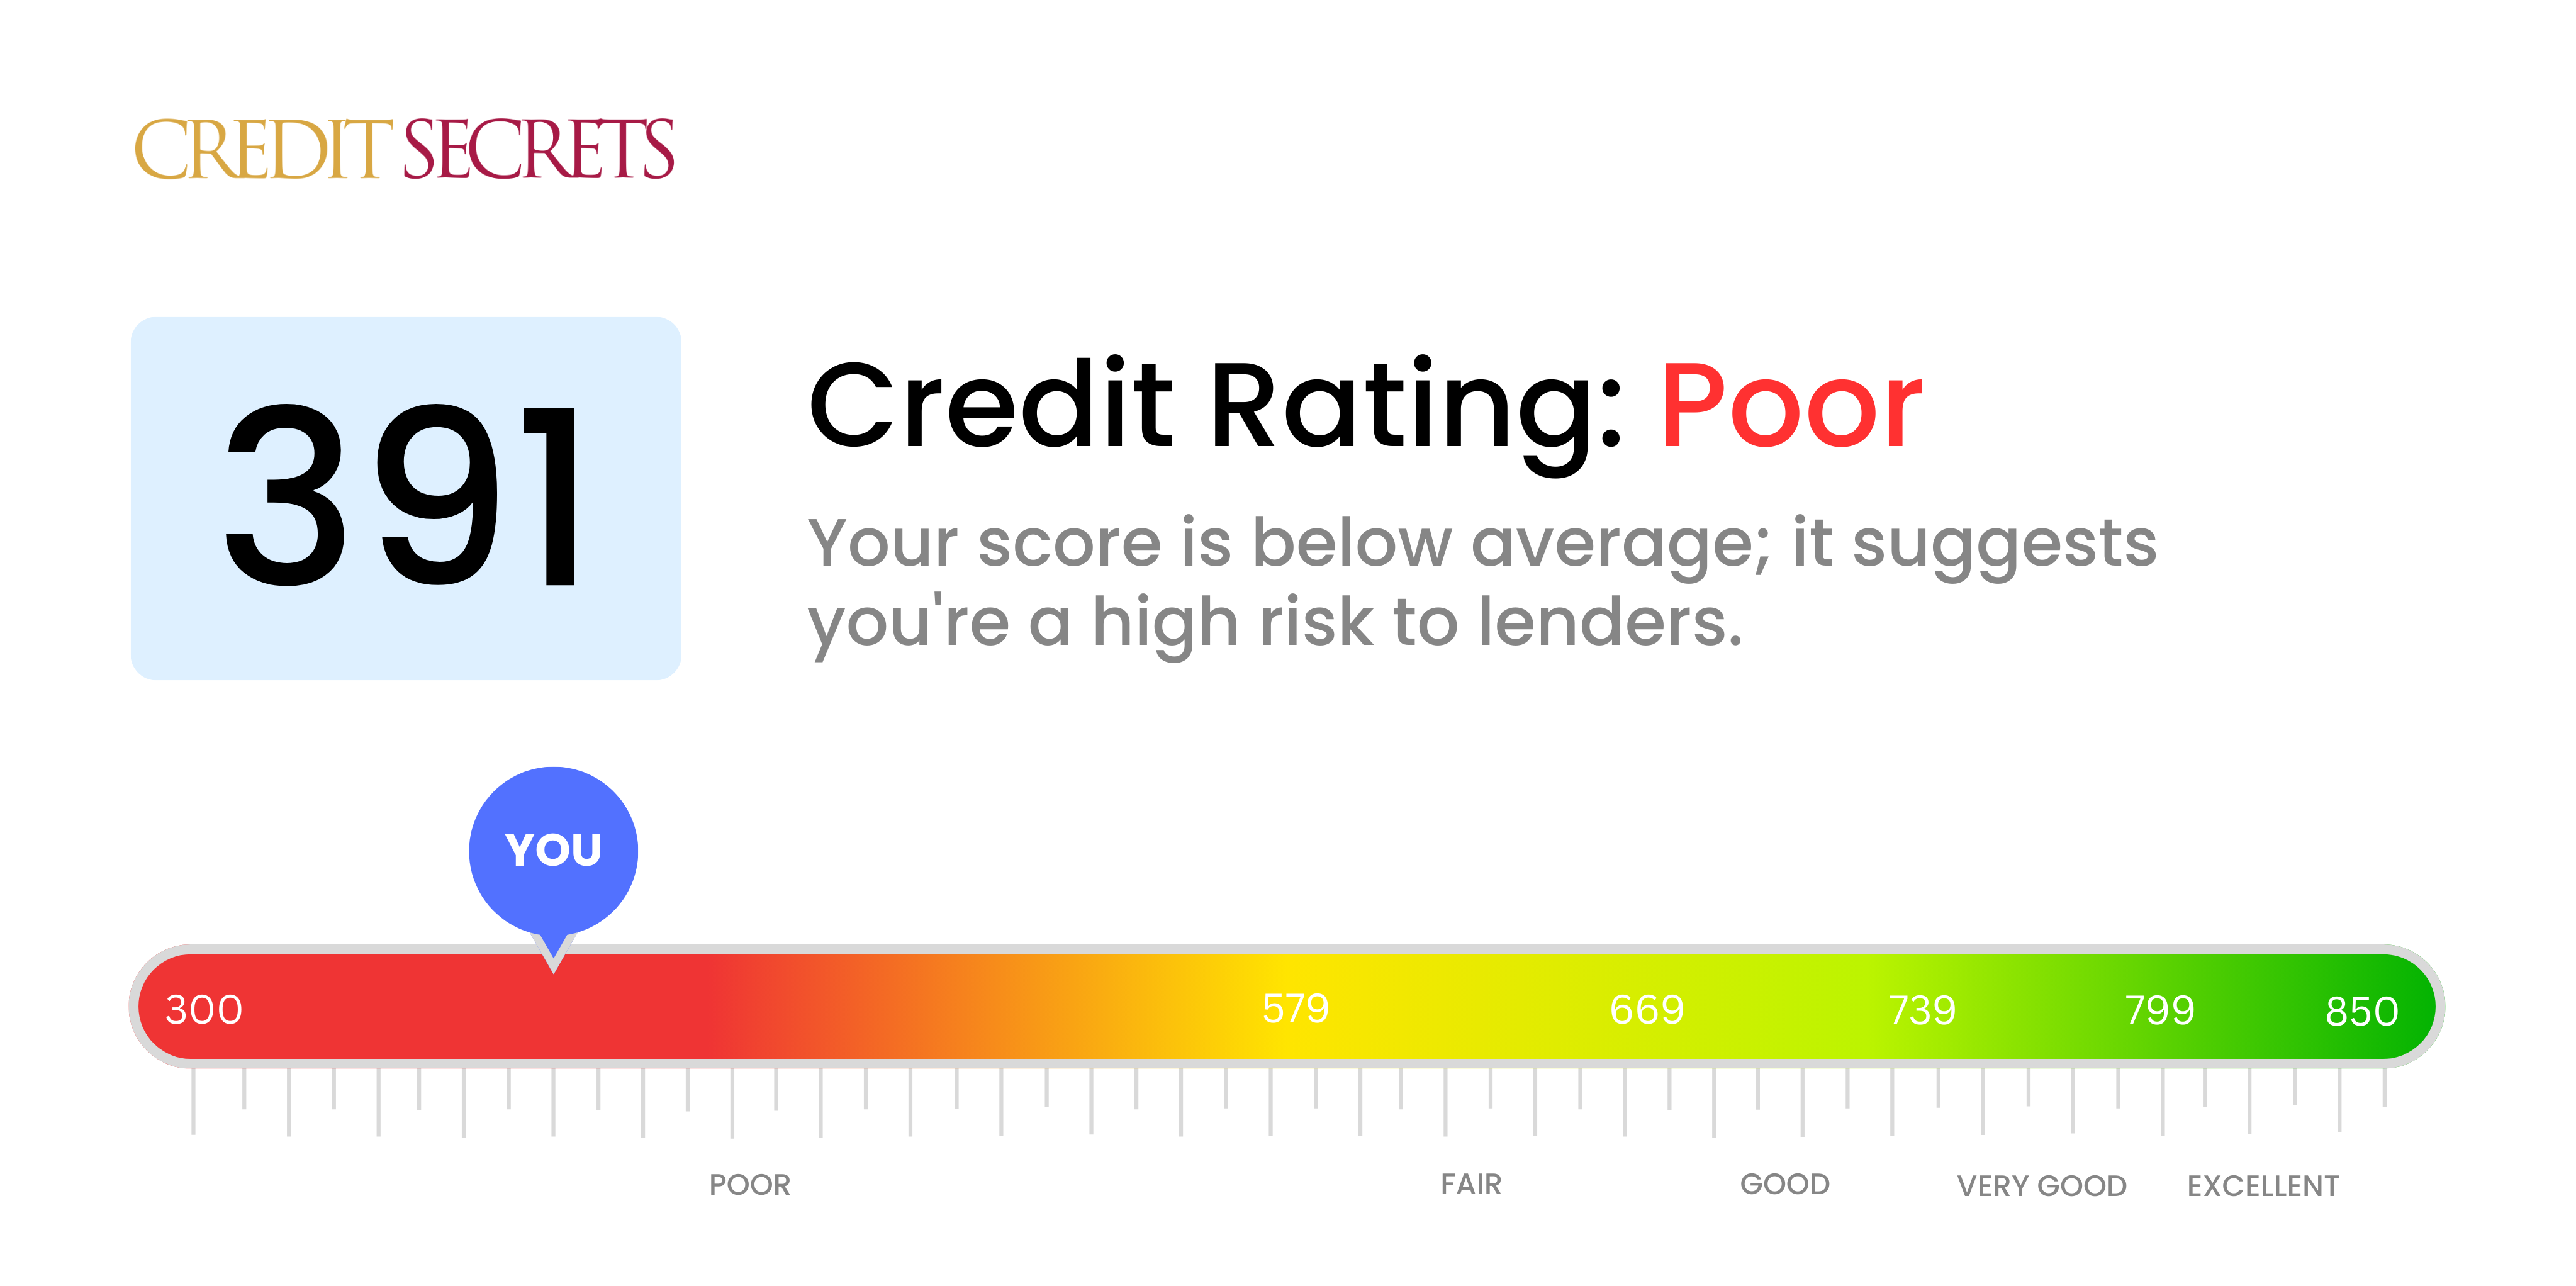 Is 391 a good credit score?